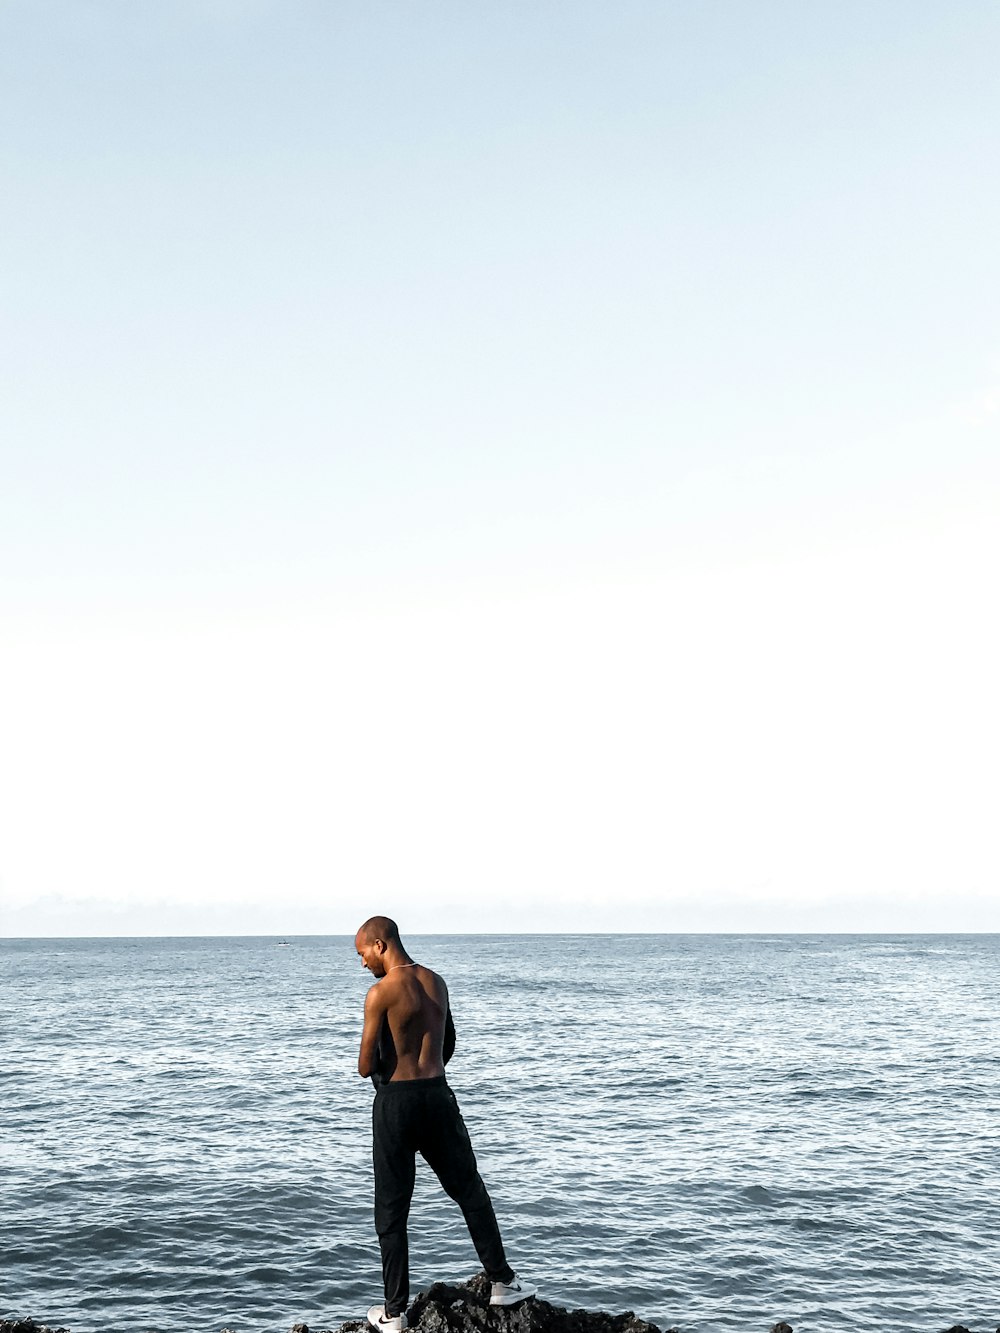 topless man in black shorts standing on sea shore during daytime